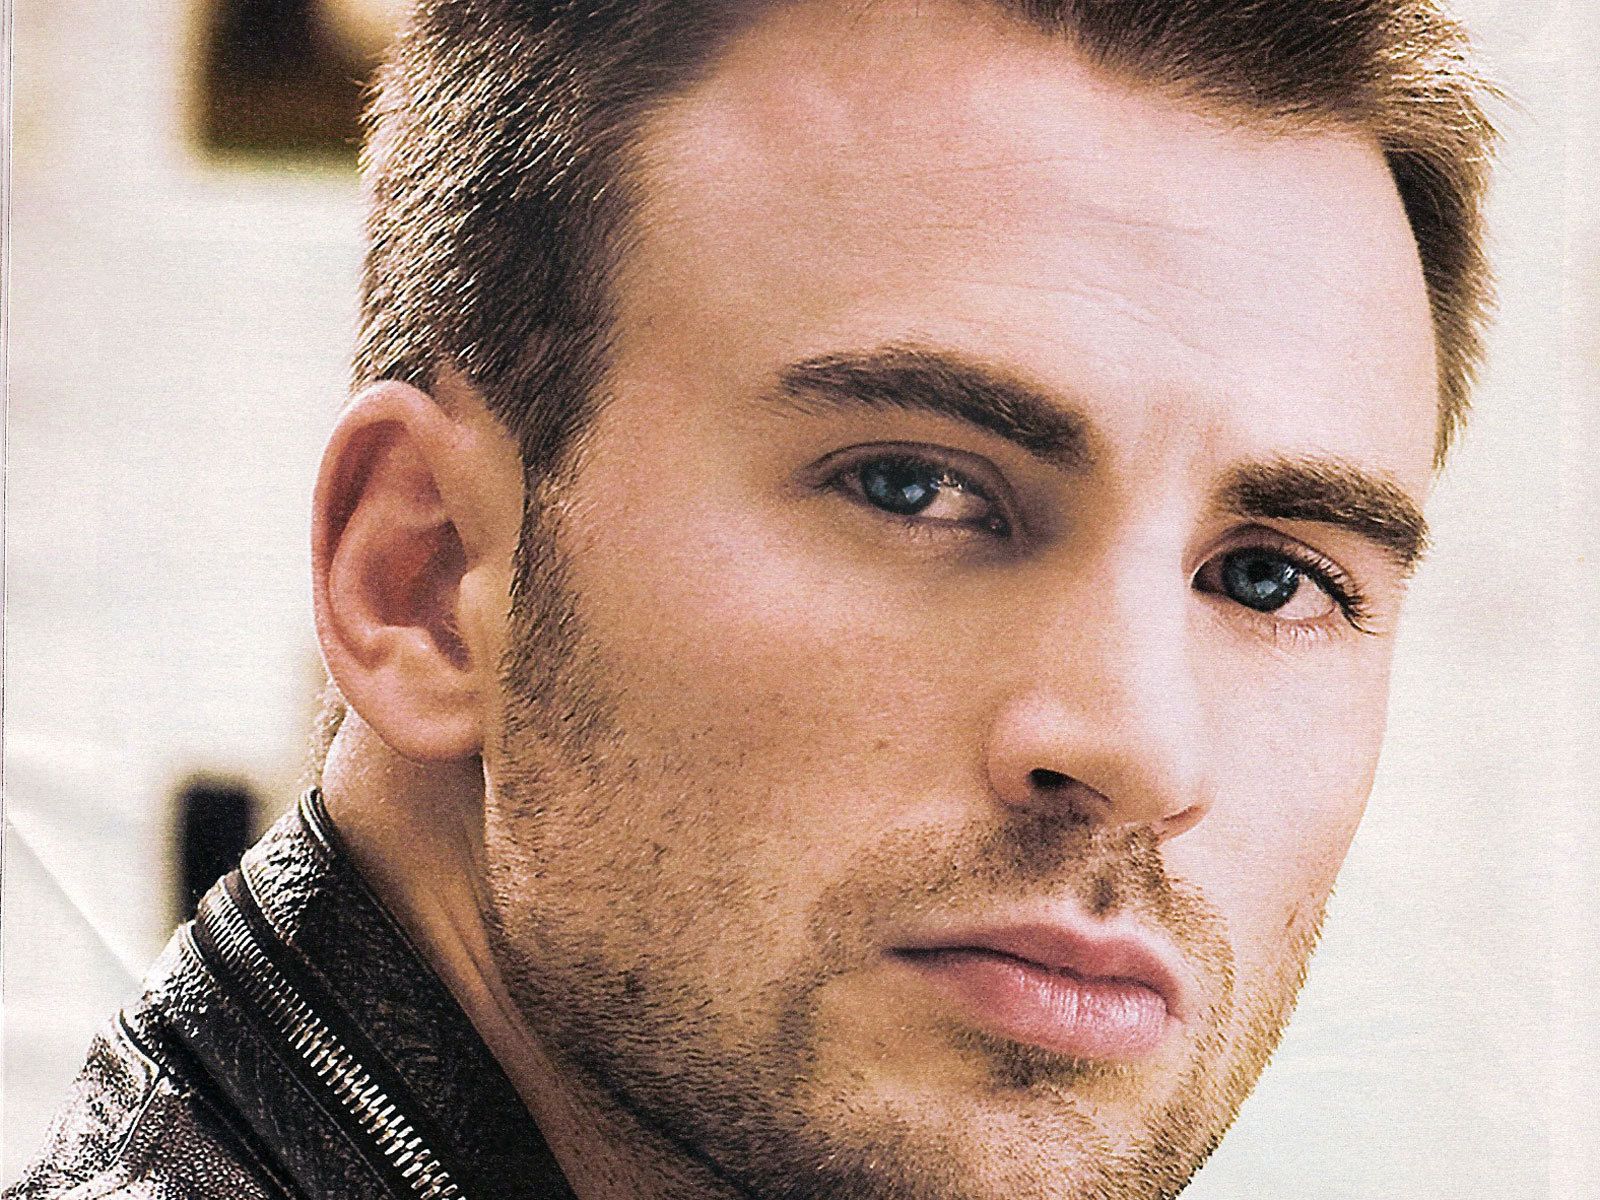 Popular Actor Chris Evans wallpapers and images - wallpapers ...